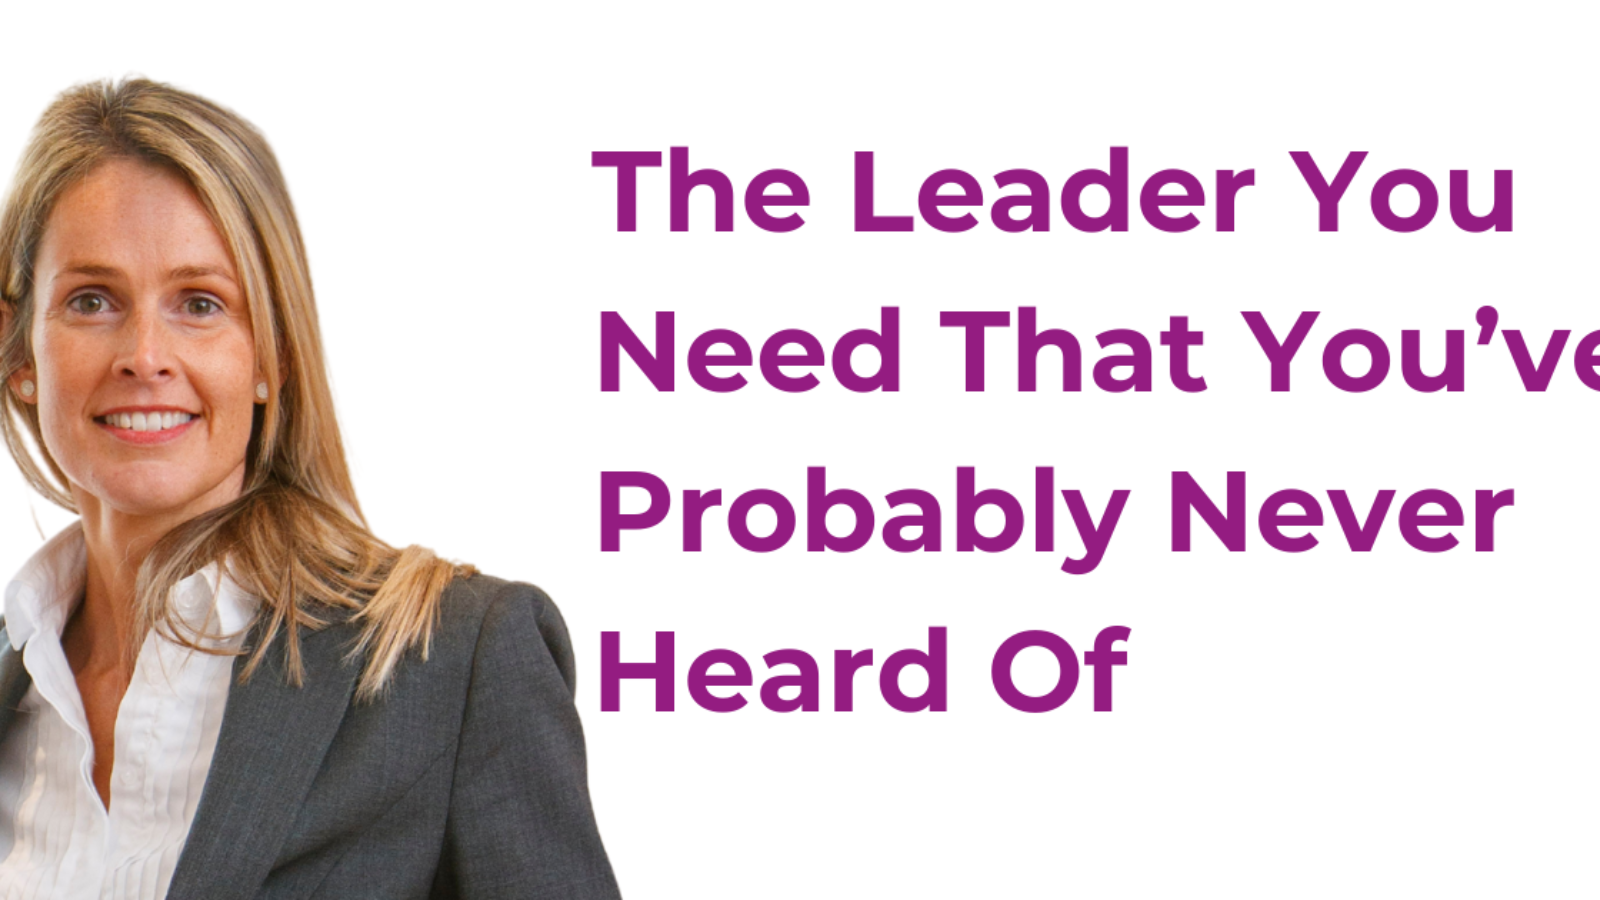 The leader your business needs that you’ve probably never heard of